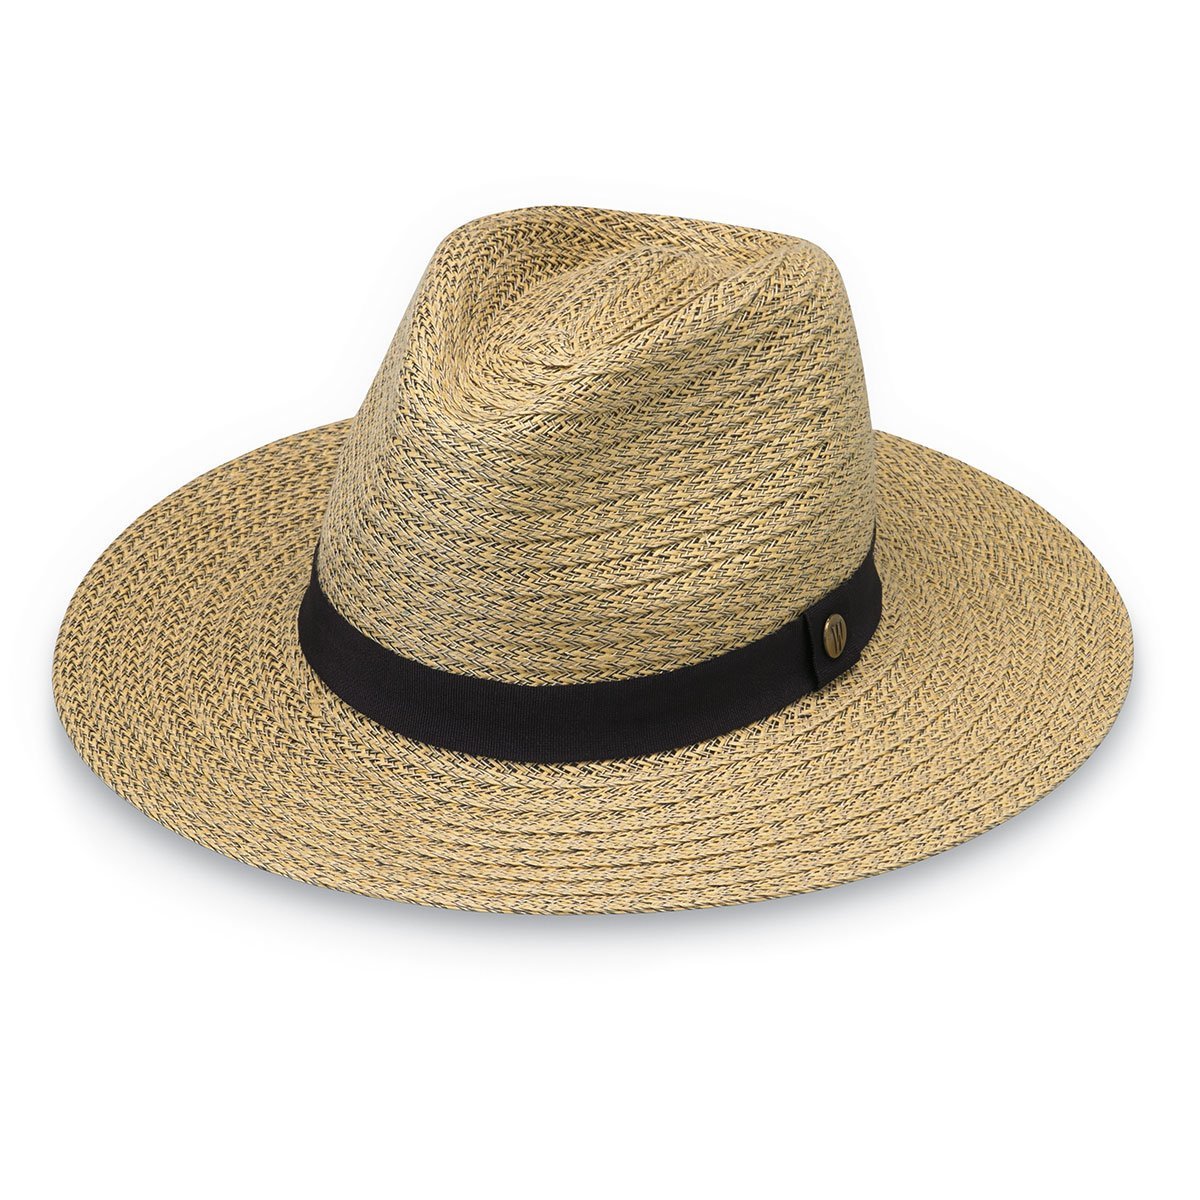 Featuring Front of Men's Packable Fedora Style Palmer Paper Braid UPF Sun Hat in Natural from Wallaroo